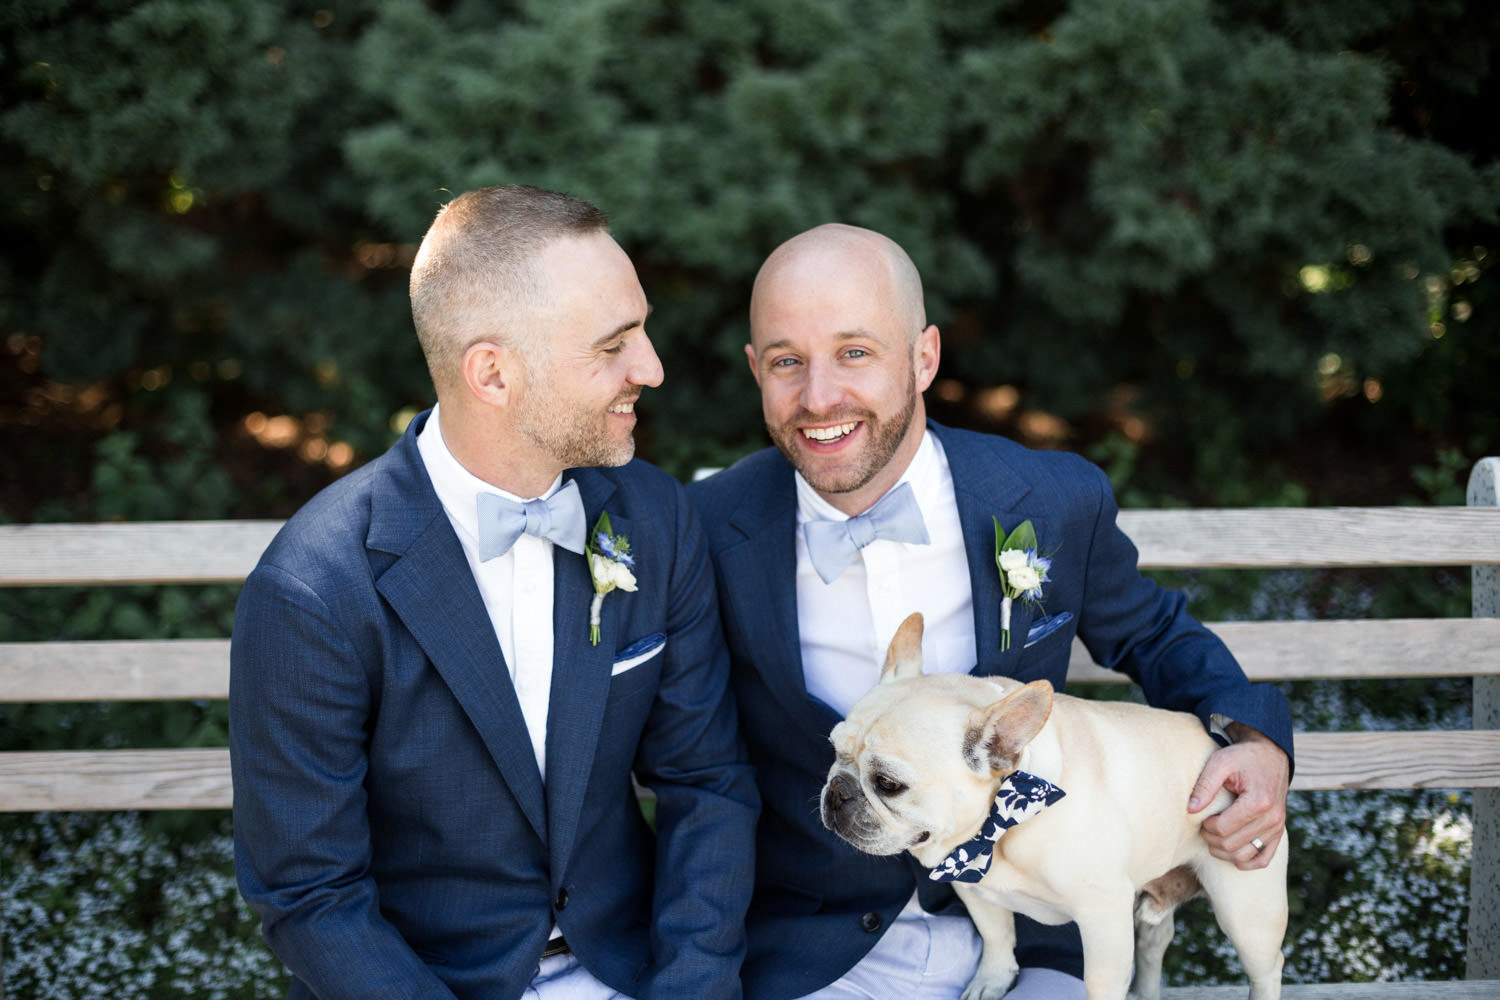 Two grooms pose for their wedding day in Seattle Washington by Danielle Motif Photography